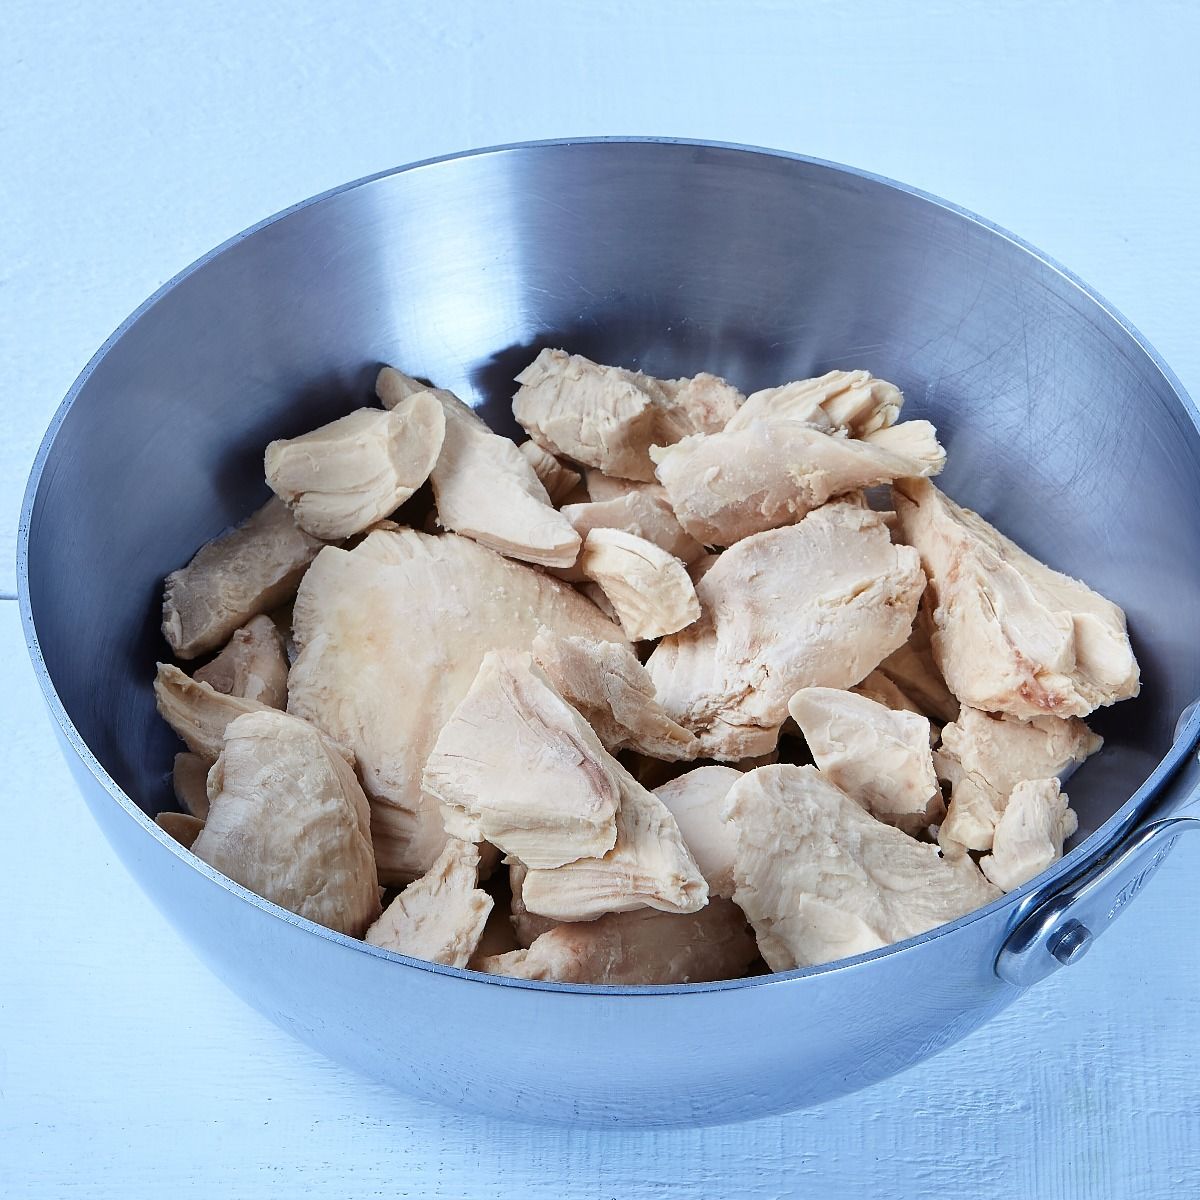 Cooked chicken pieces, 100% white meat